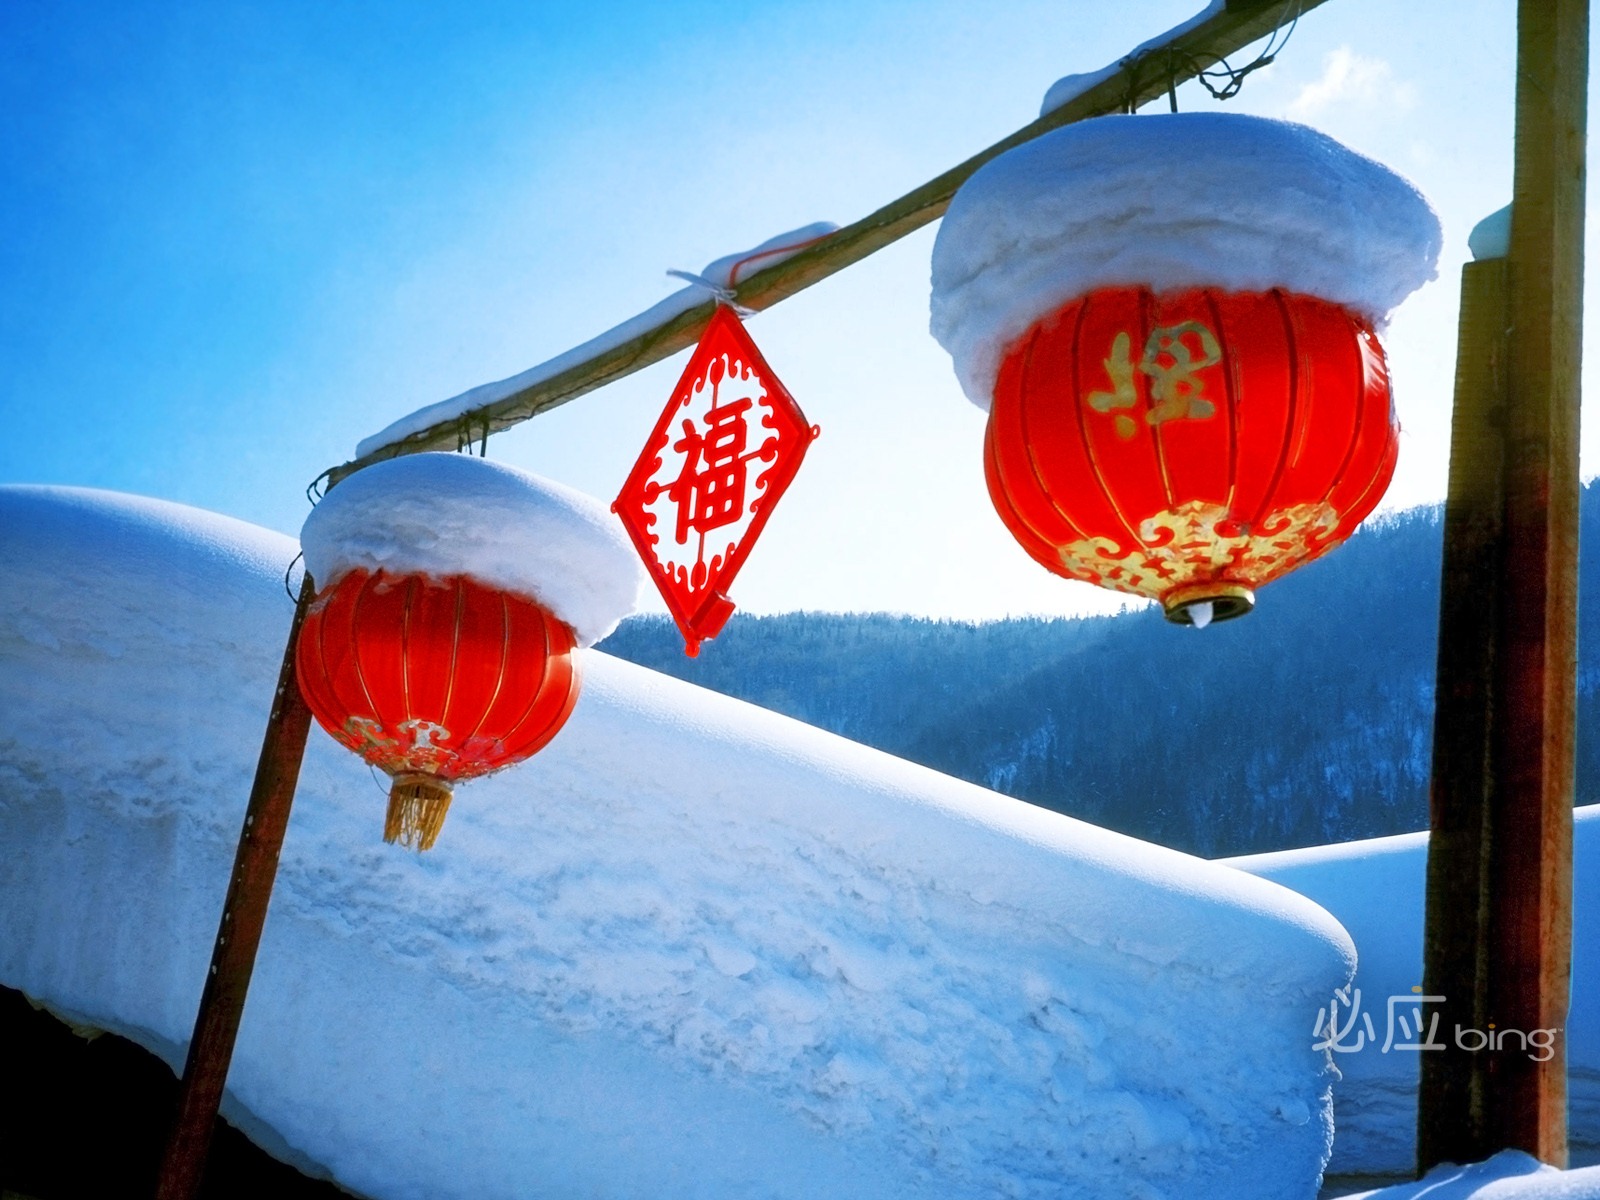 Best of Bing Wallpapers: China #3 - 1600x1200